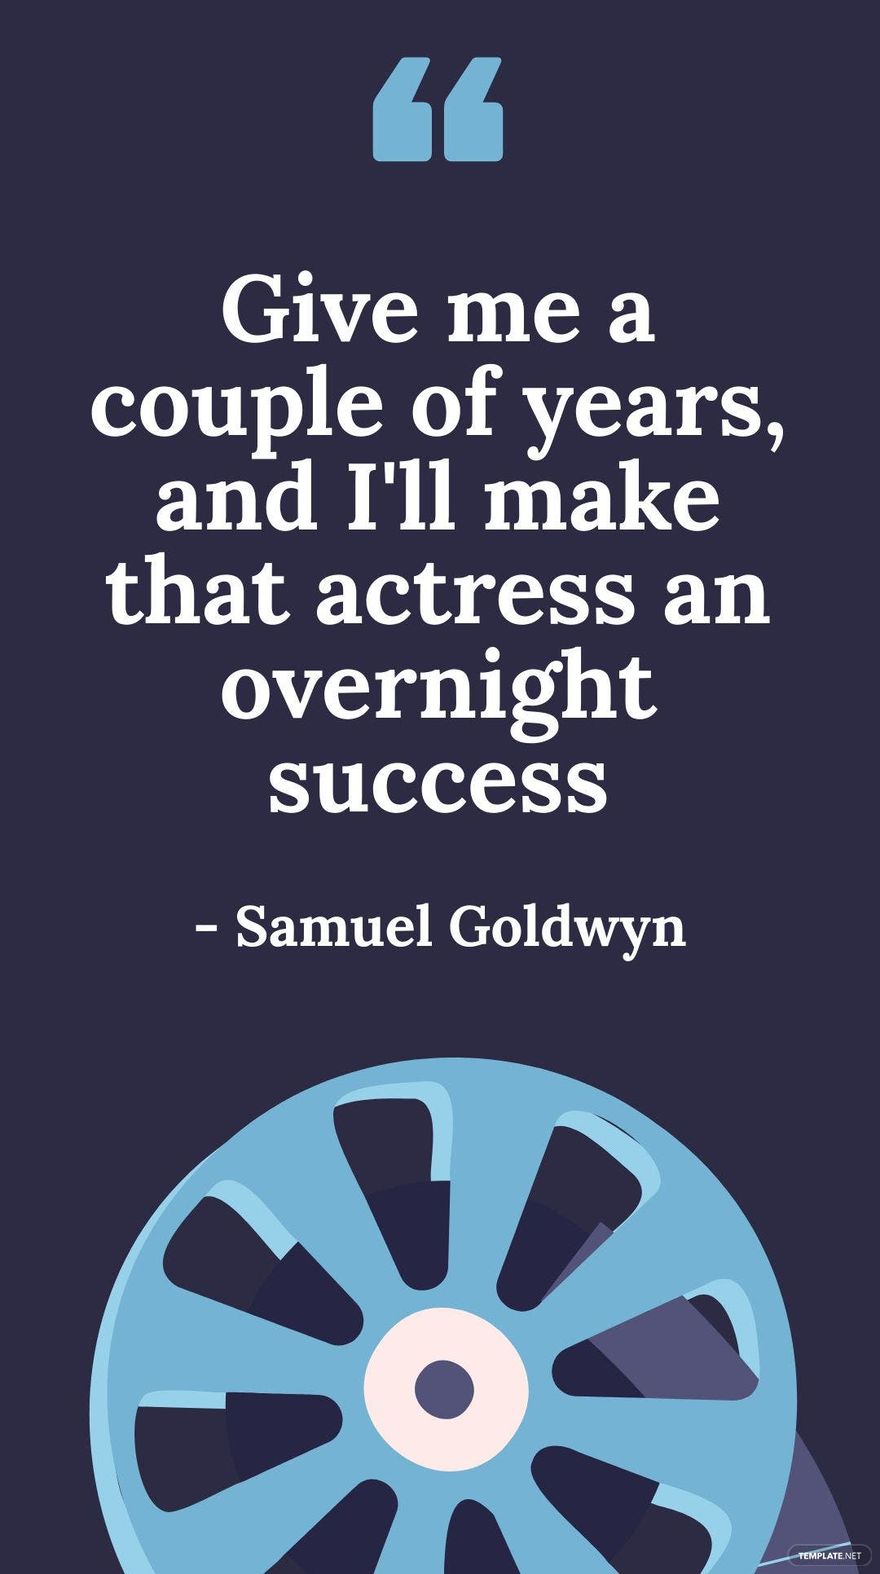 Free Samuel Goldwyn - Give me a couple of years, and I'll make that actress an overnight success in JPG